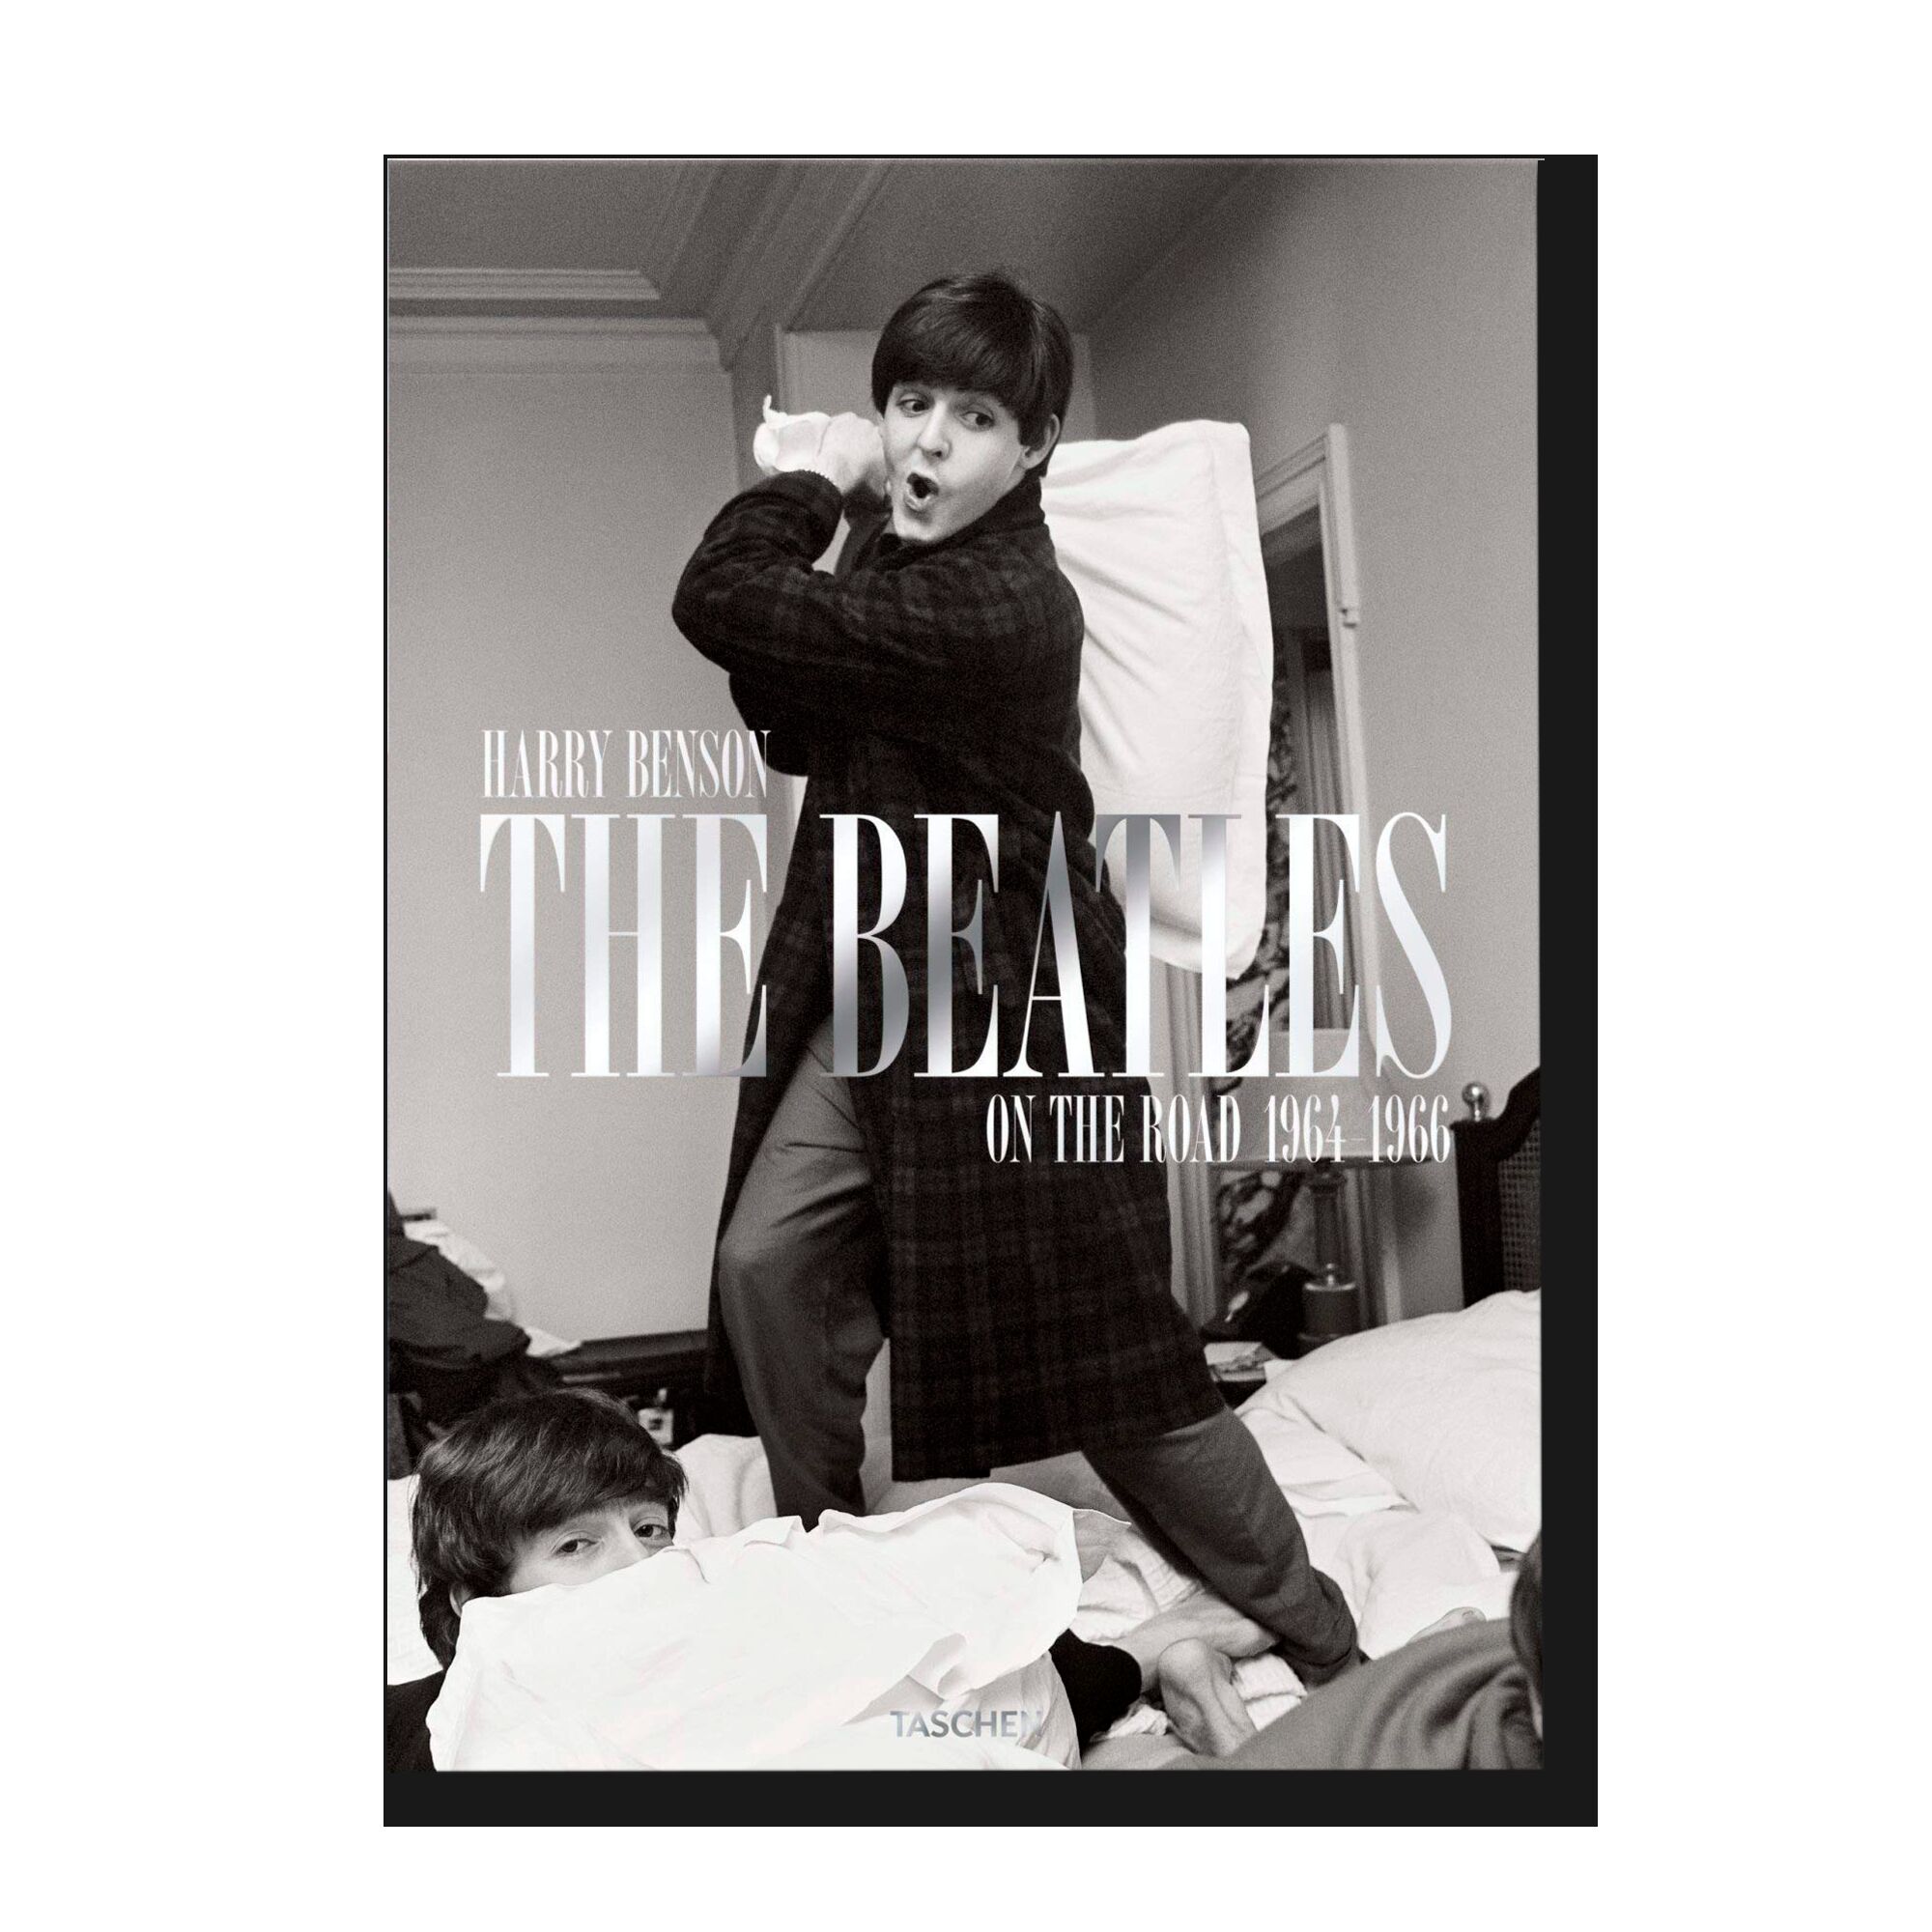 Harry Benson: The Beatles on the Road 1964-1966